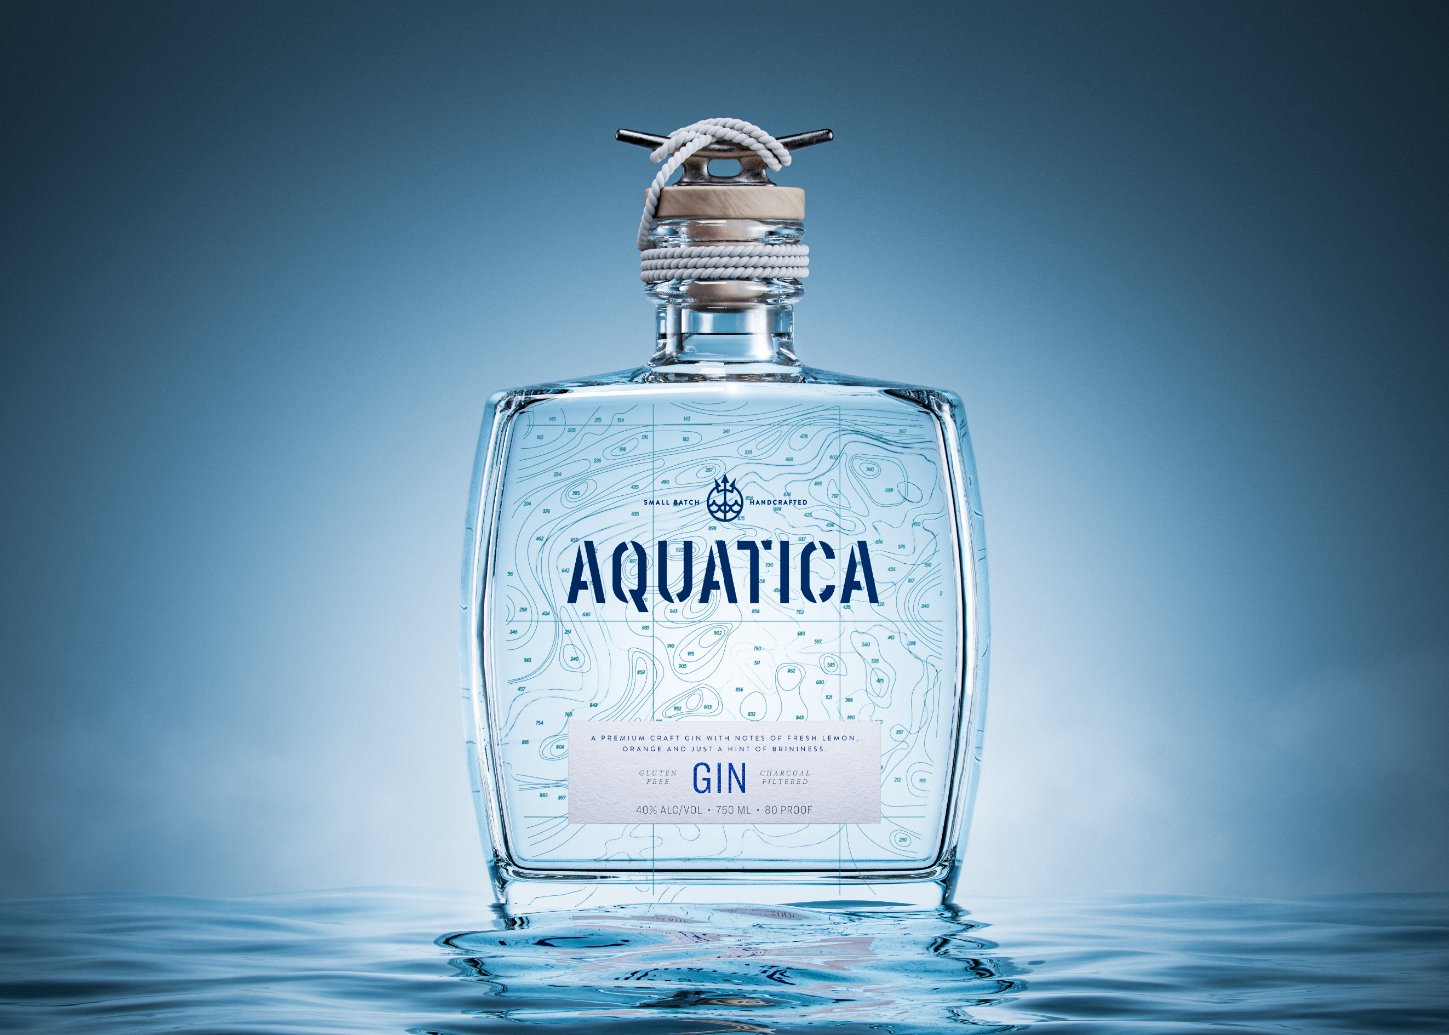 Aquatica Gin Makes Drinking an Adventure with Their Clever Nautical Bottle